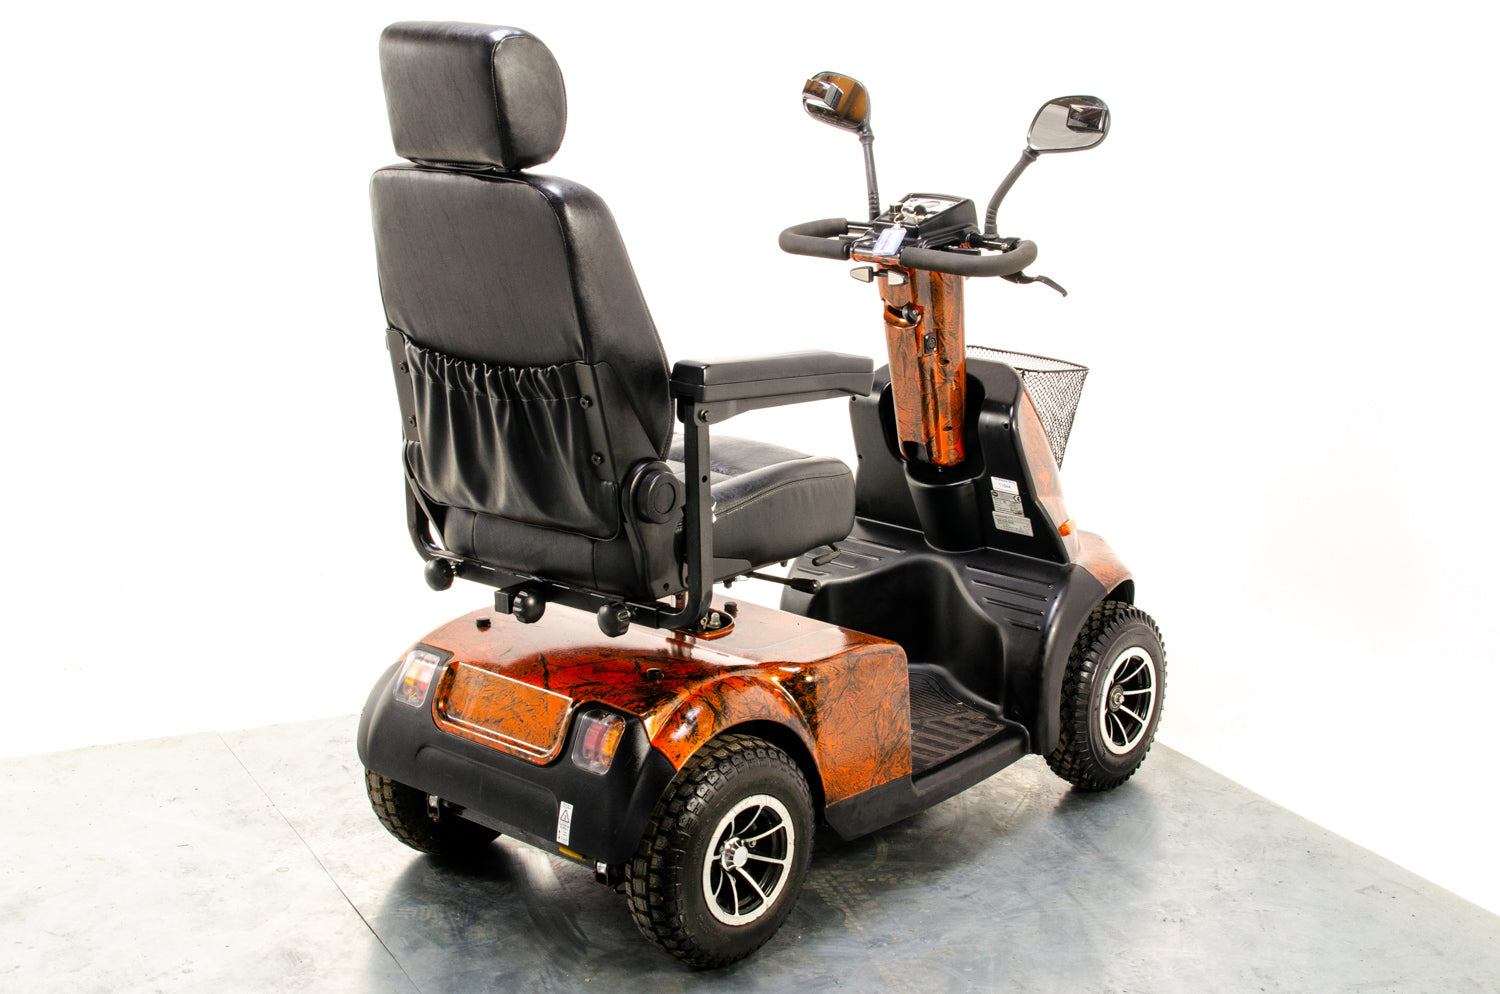 TGA Breeze Midi 4 All-Terrain Off-Road Used Electric Mobility Scooter 8mph Road Suspension